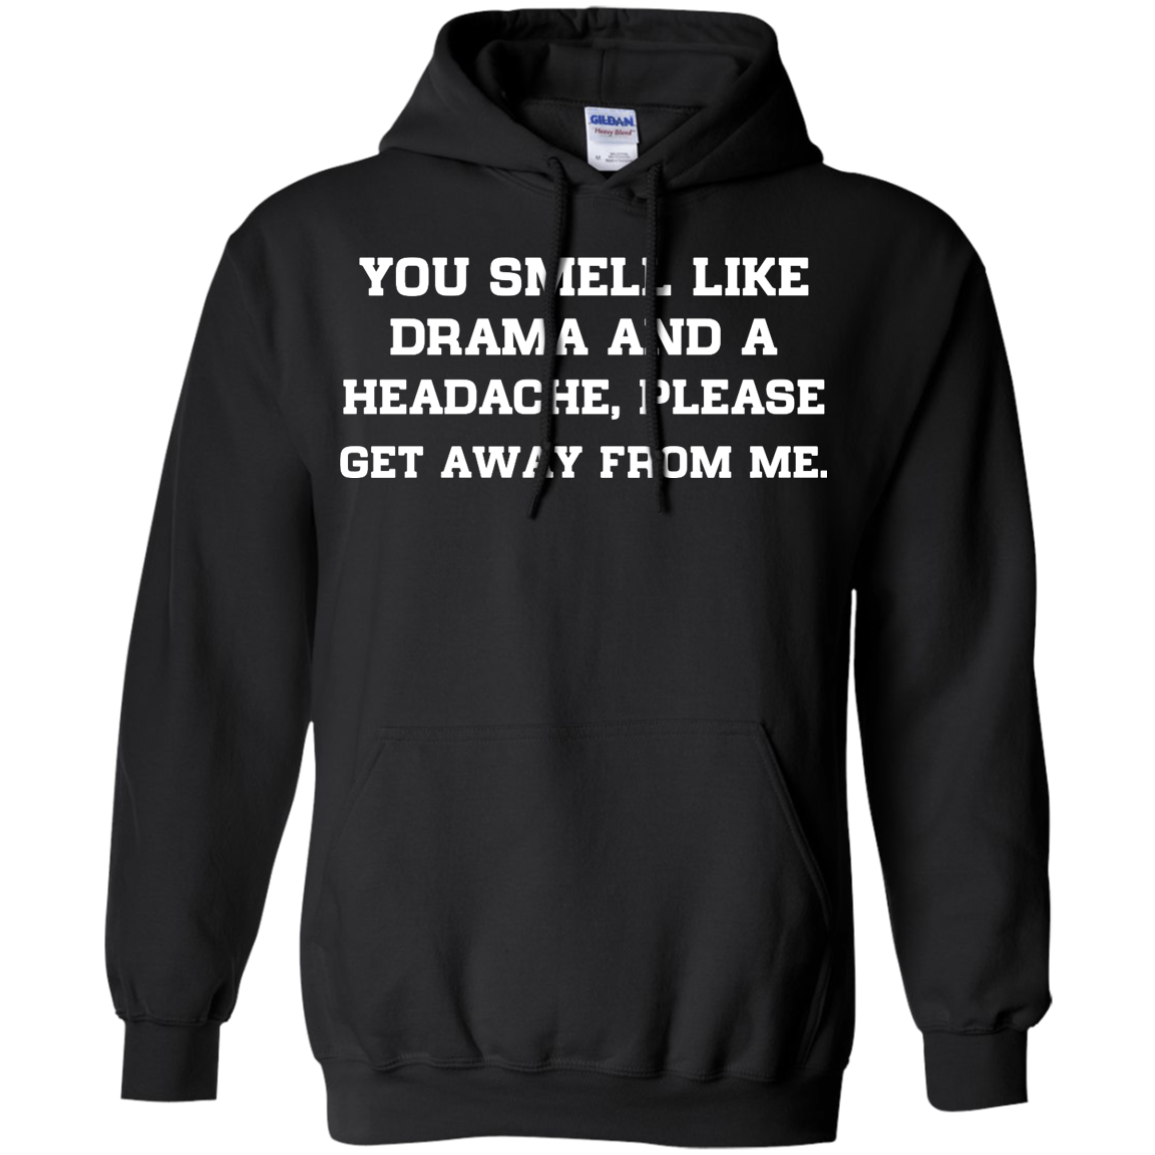 You smell like drama and a headache - please get away from me unisex t ...